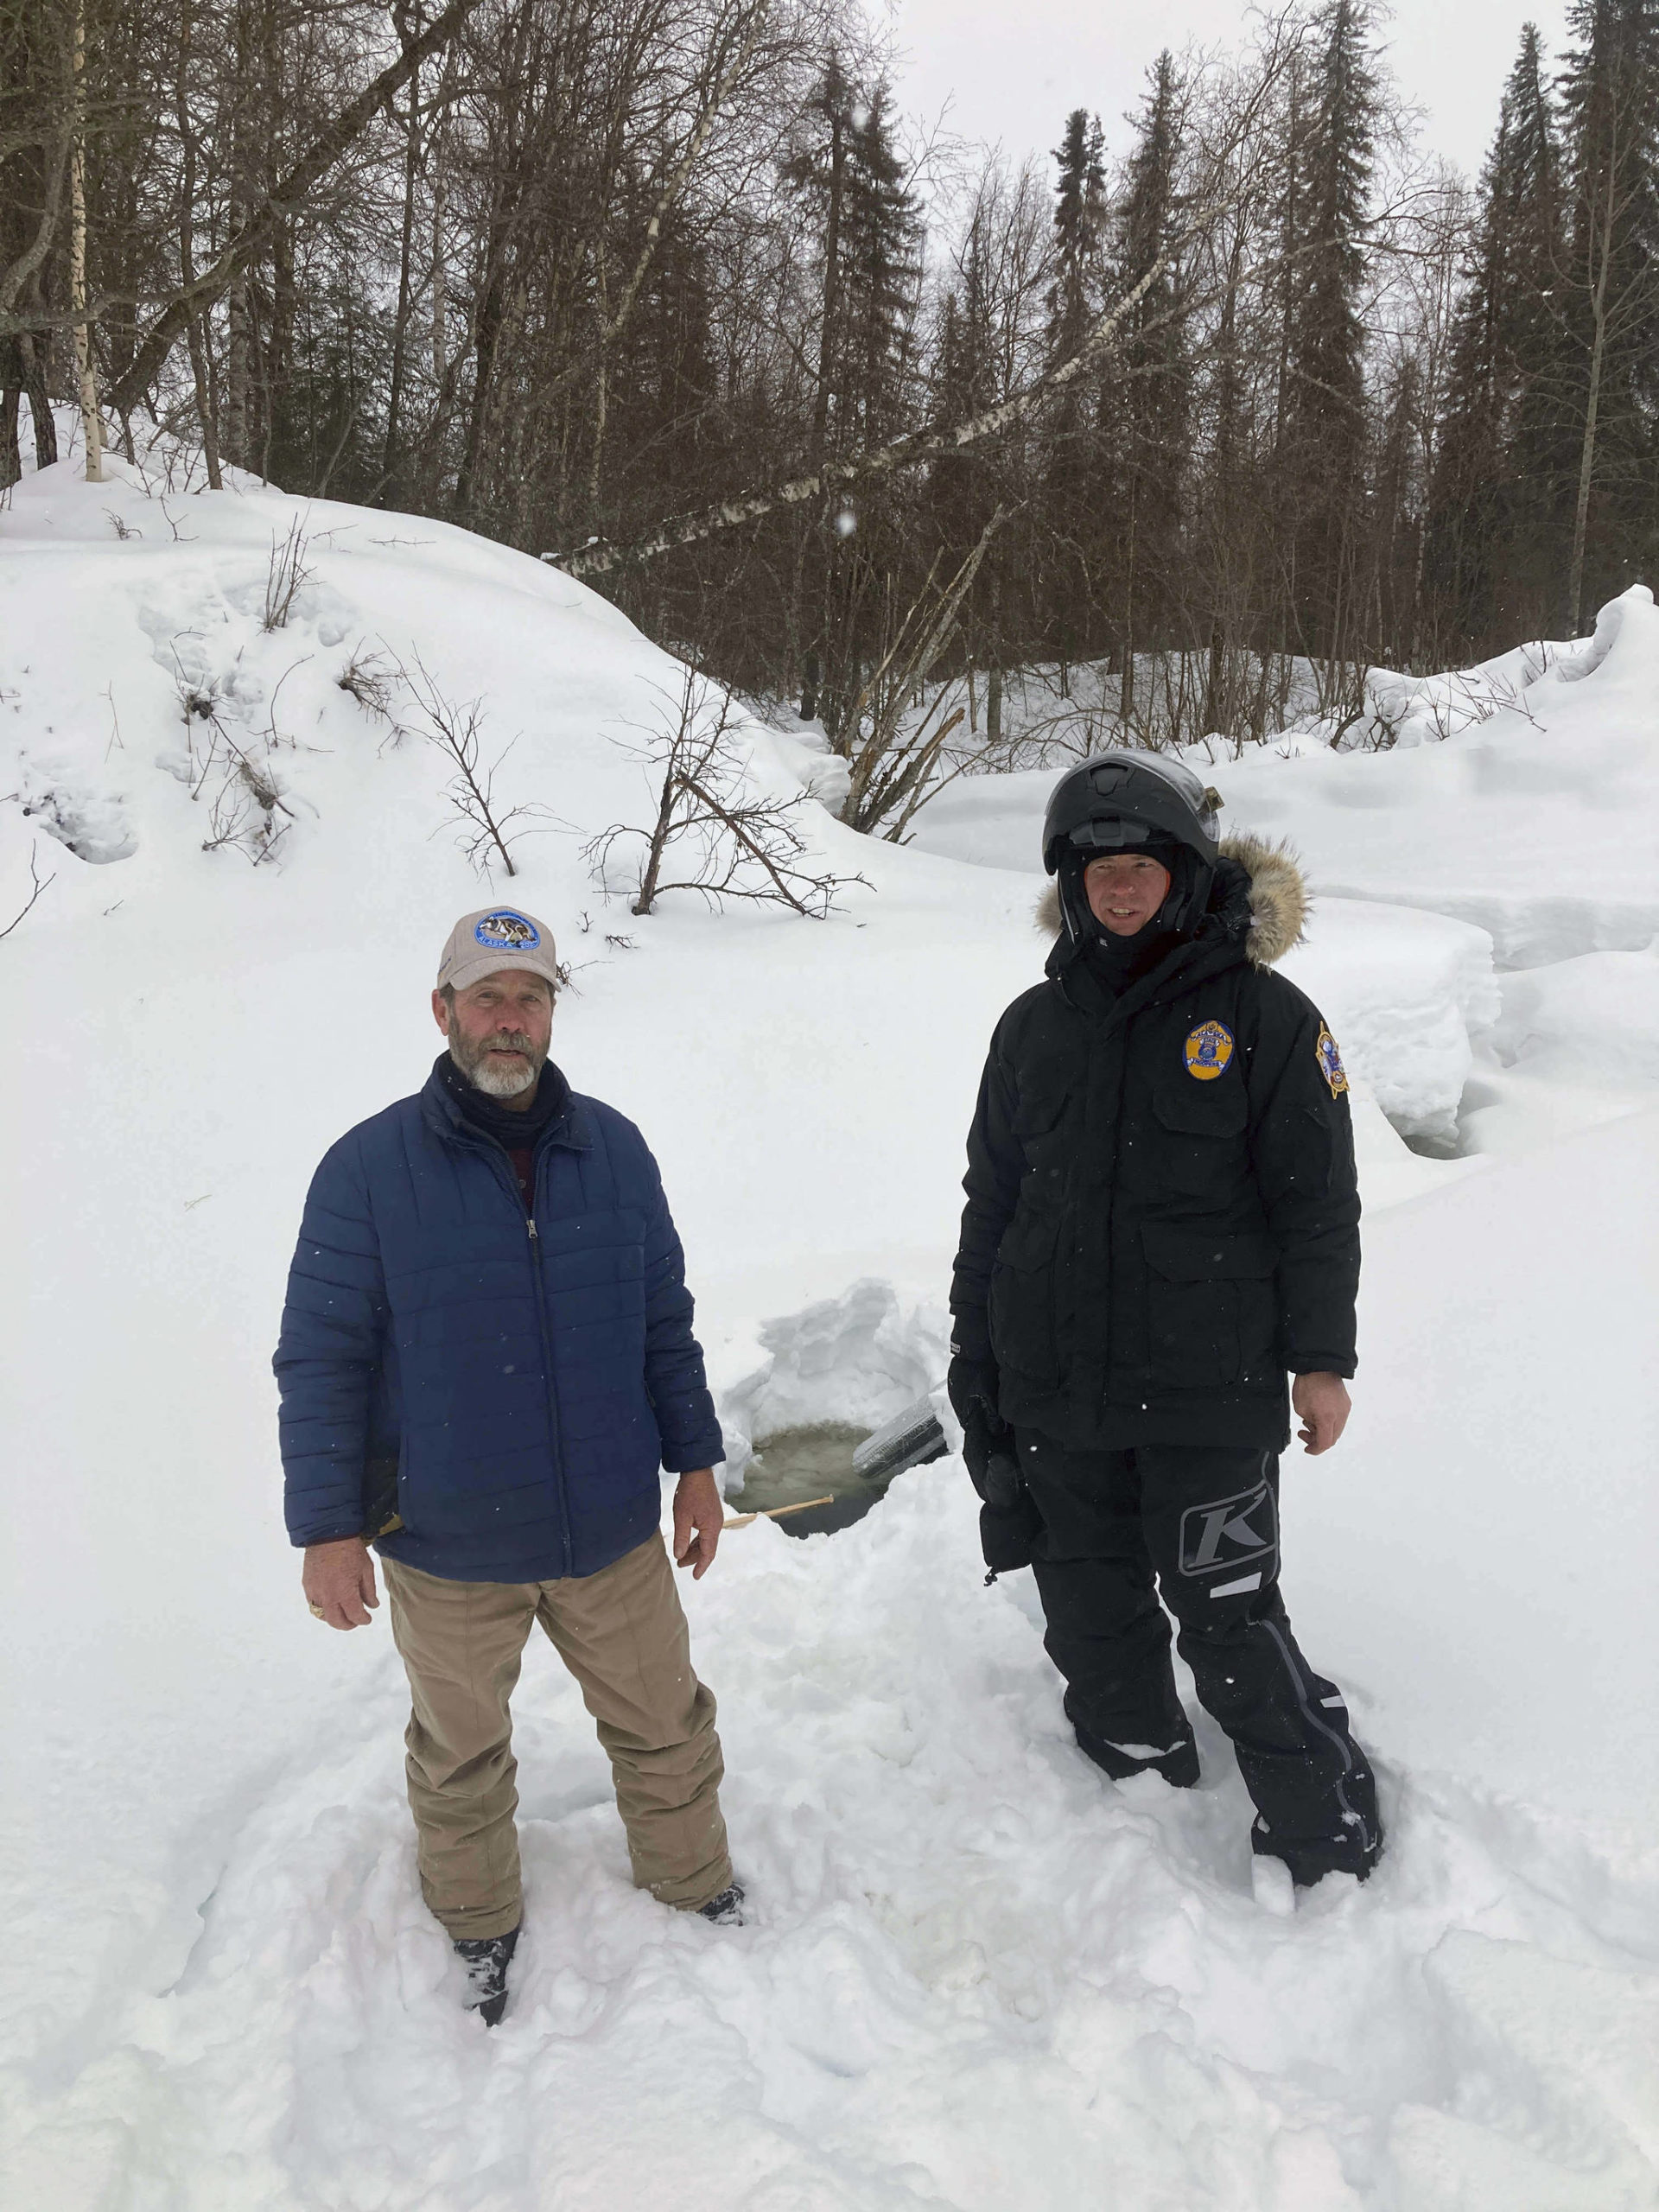 This photo provided by the Alaska Wildlife Troopers taken March 9, 2021, Doug Ramsey, left, of Sundance Wyoming, poses with Alaska Wildlife Trooper Jason Kneier near a hole in the ice of a river in Swentna, Alaska. The two helped pull an 8-year-old boy from the water after he fell into the river. (Alaska Wildlife Troopers)